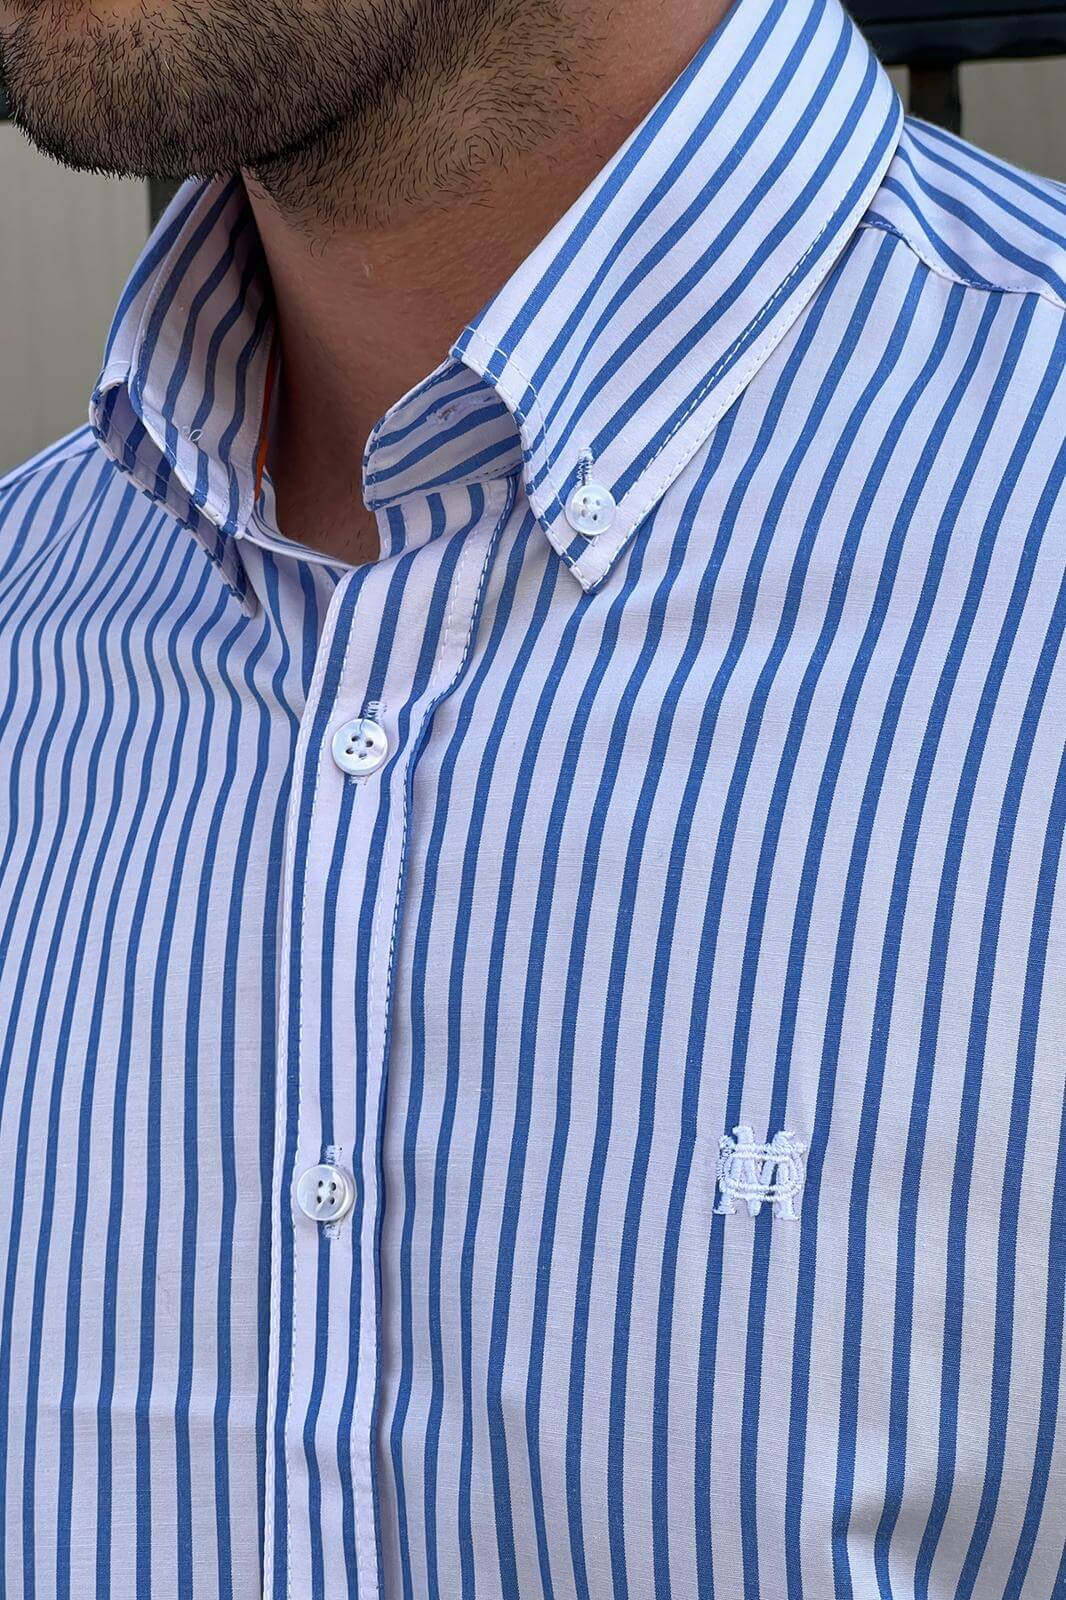 A Slim Fit Stripped white and Blue Cotton Shirt on display